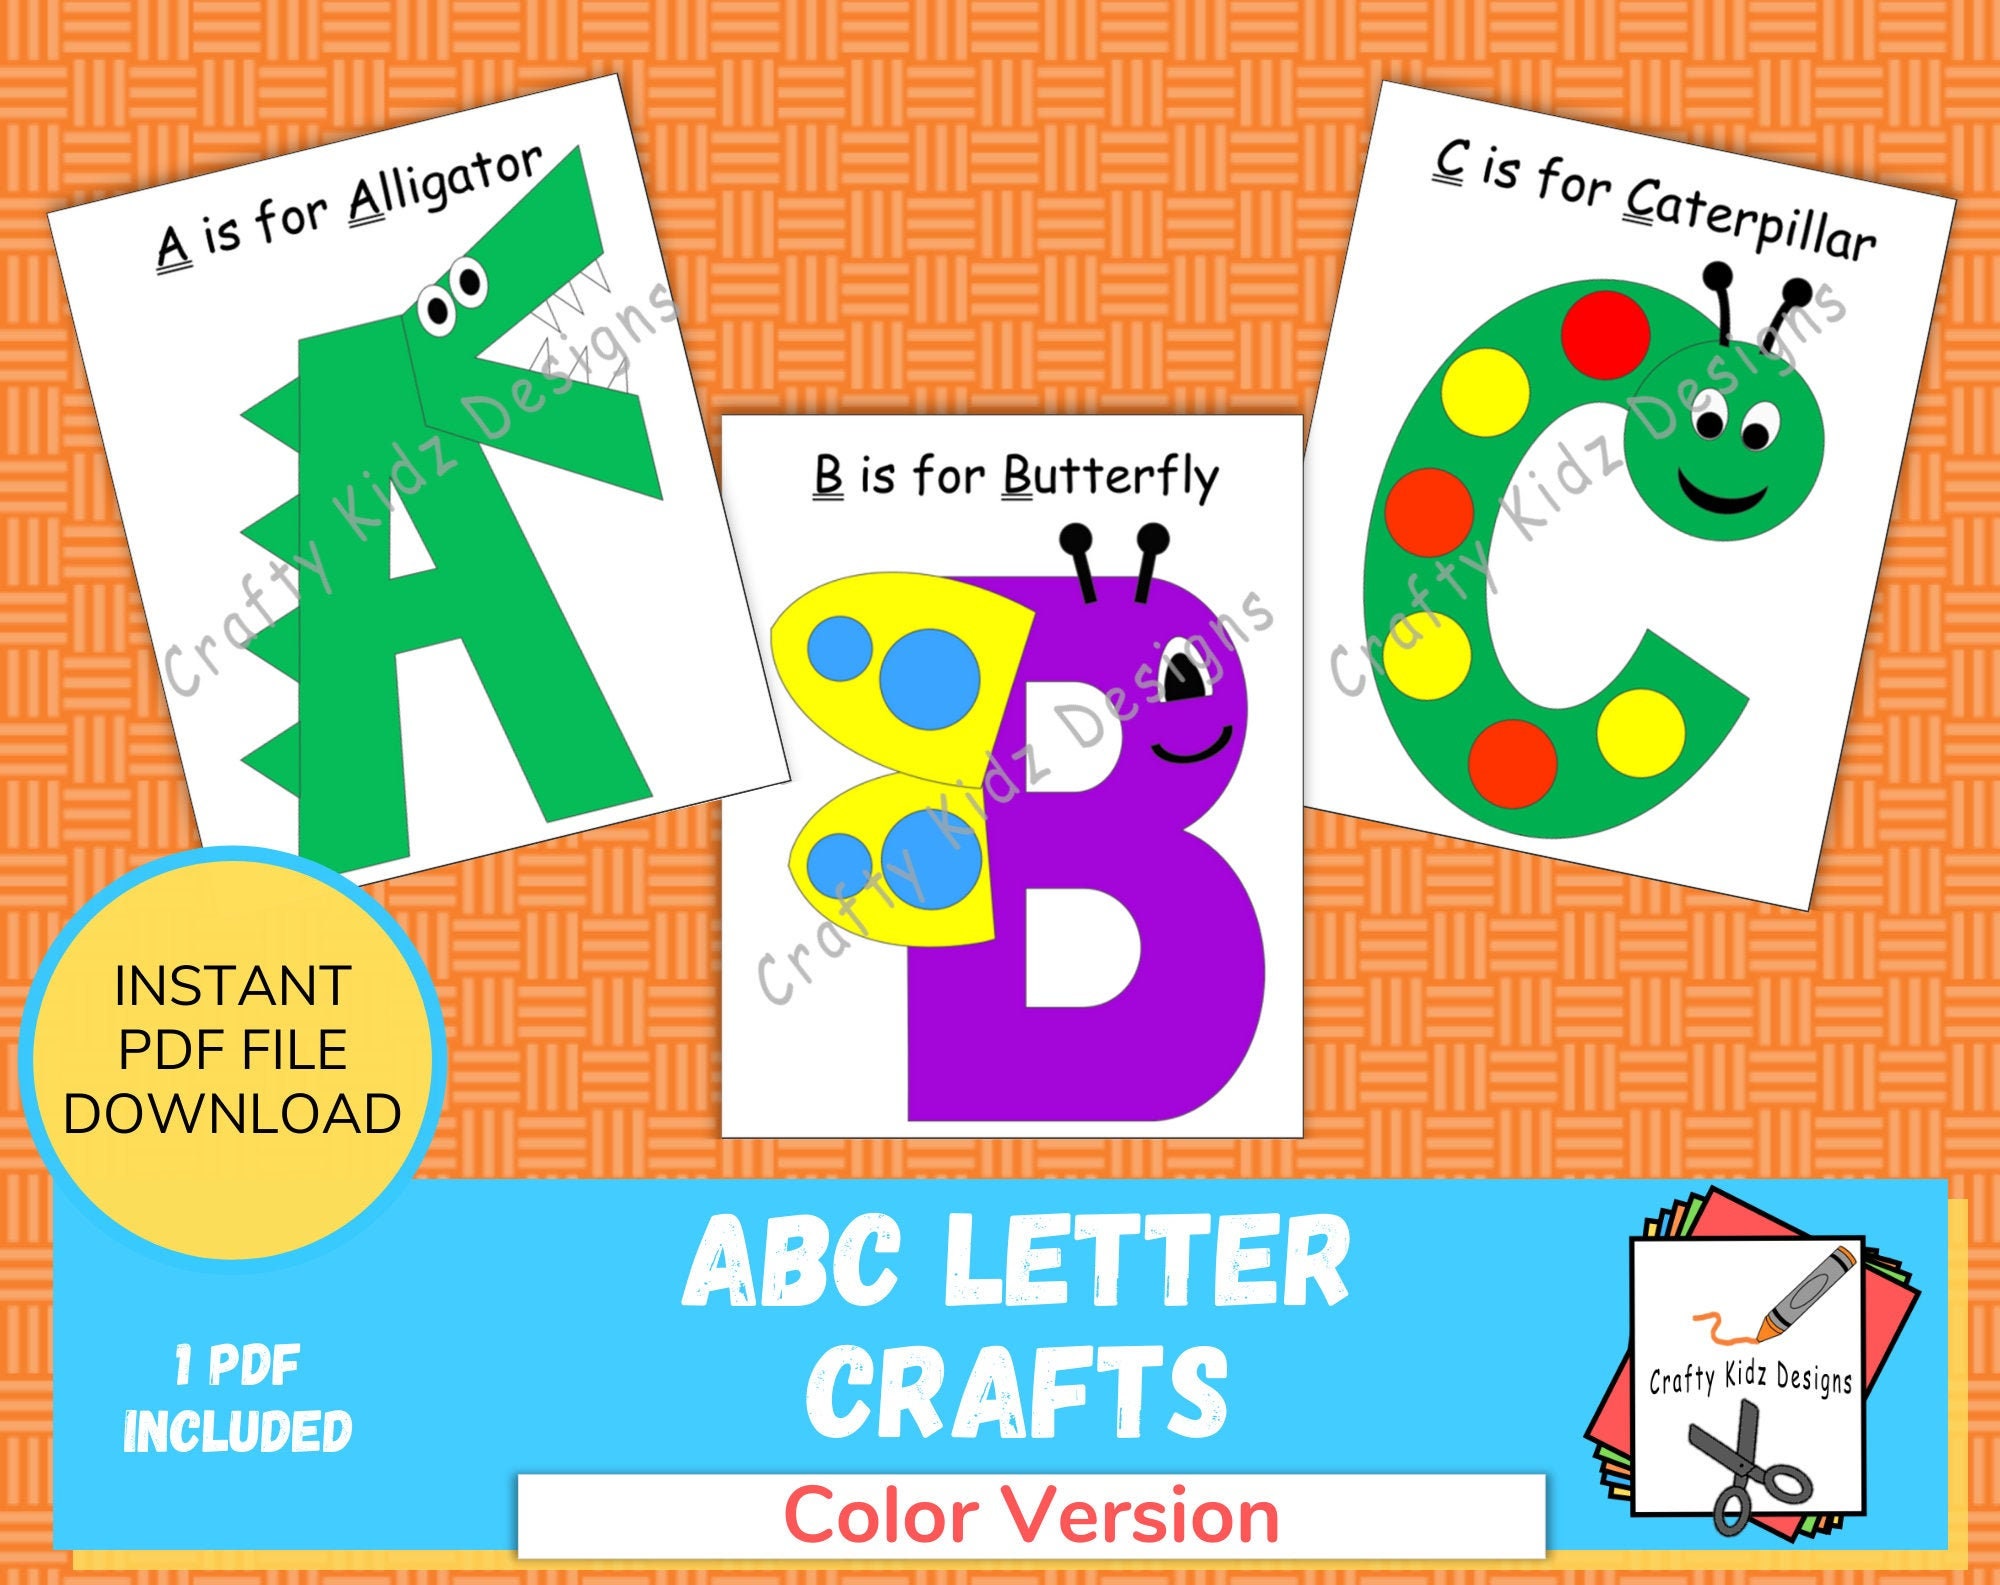 The benefits of arts and crafts for kids - ABC Kids listen